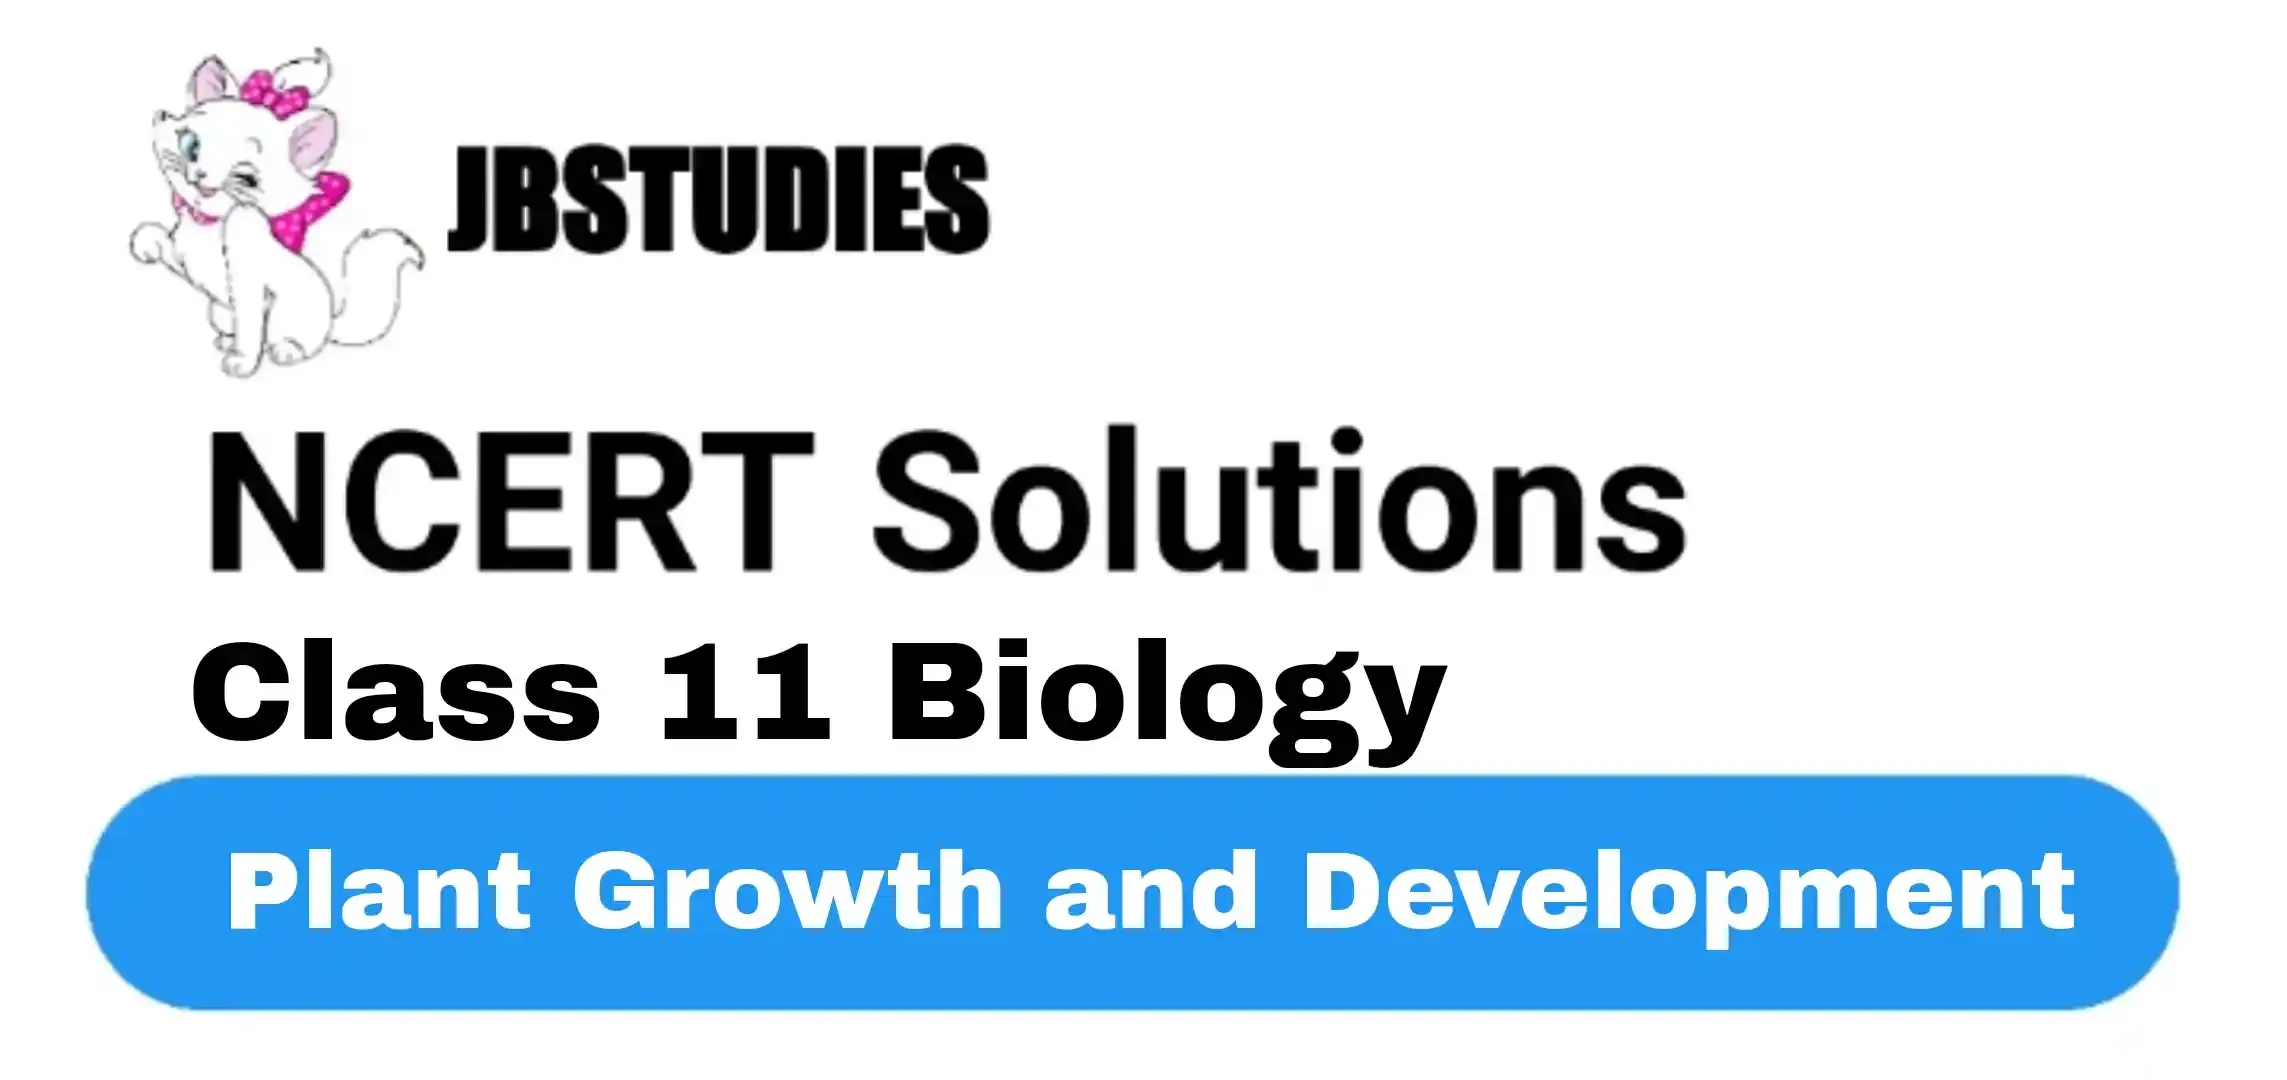 Solutions Class 11 Biology Chapter -15 (Plant Growth and Development)